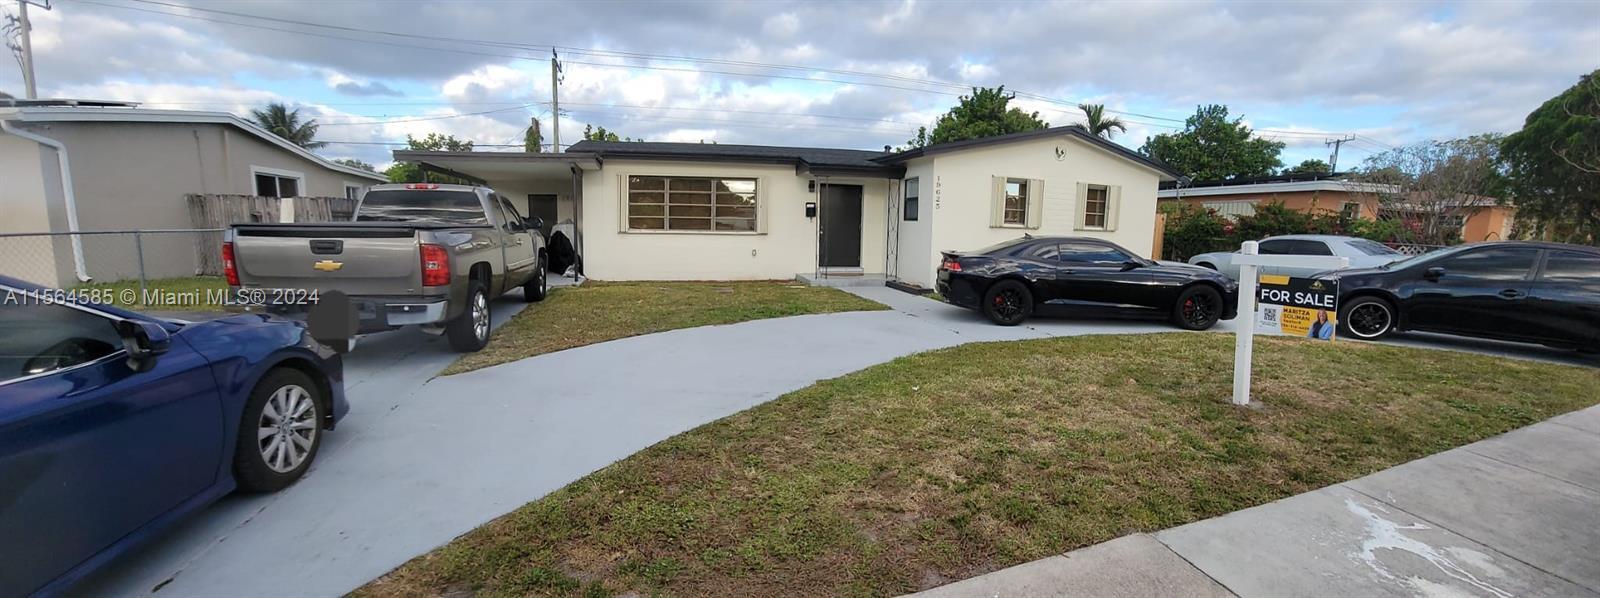 Photo of 19625 NW 5th Ave in Miami Gardens, FL